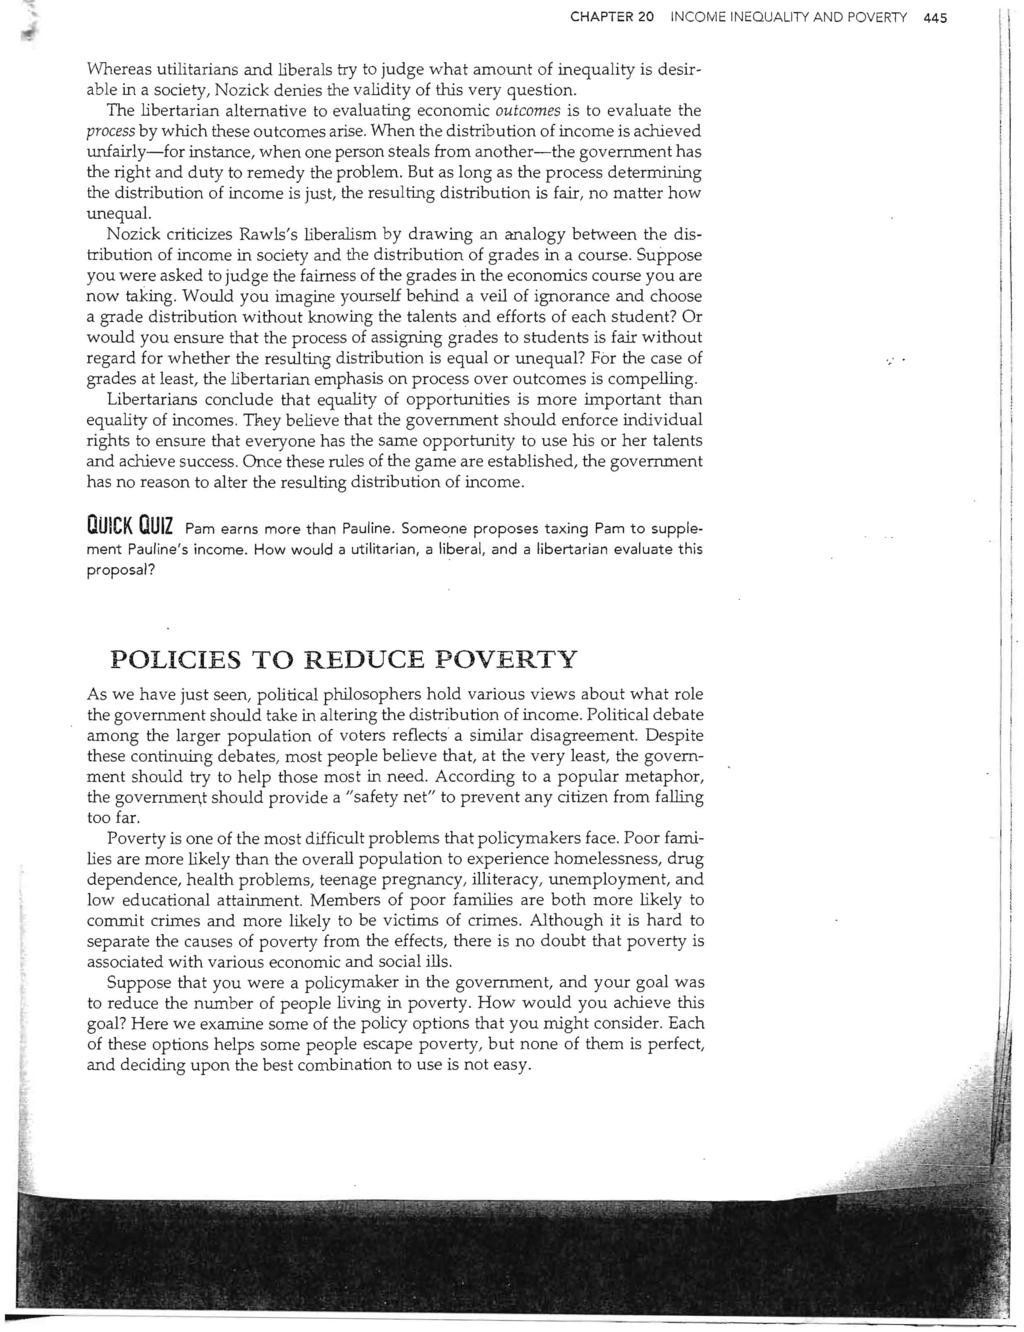 CHAPTER 20 INCOME INEQUALITY AND POVERTY 445 vvhereas utilitarians and liberals try to judge what amount of inequality is desirable in a society, Nozick denies the validity of this very question.